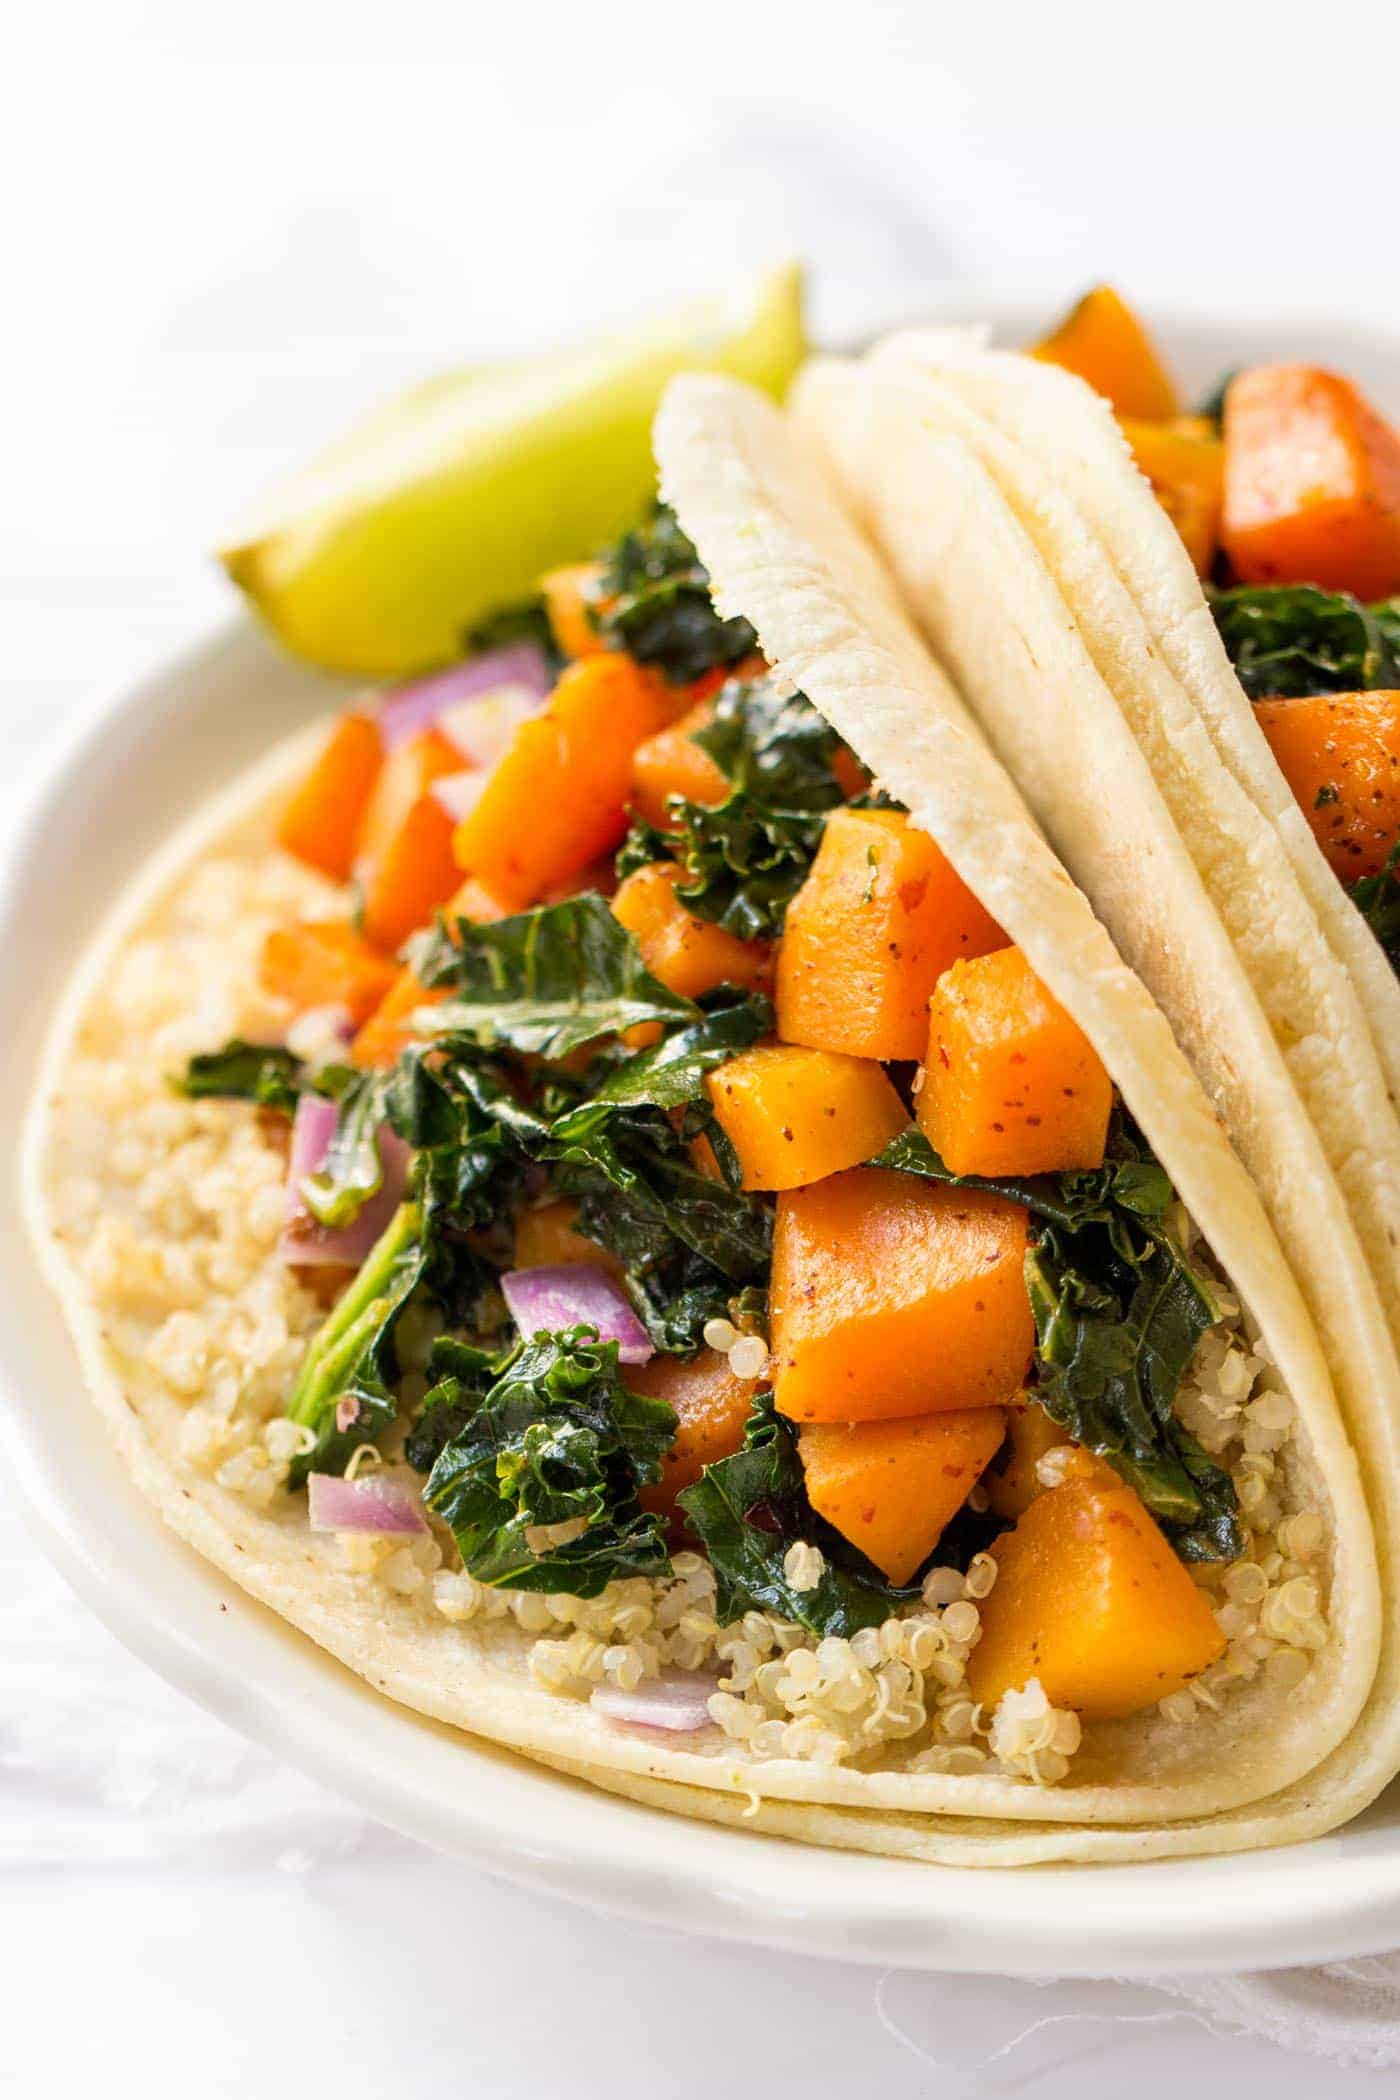 These VEGAN quinoa breakfast tacos are the perfect way to start the day -- protein-packed, fiber-rich and loads of veggies!